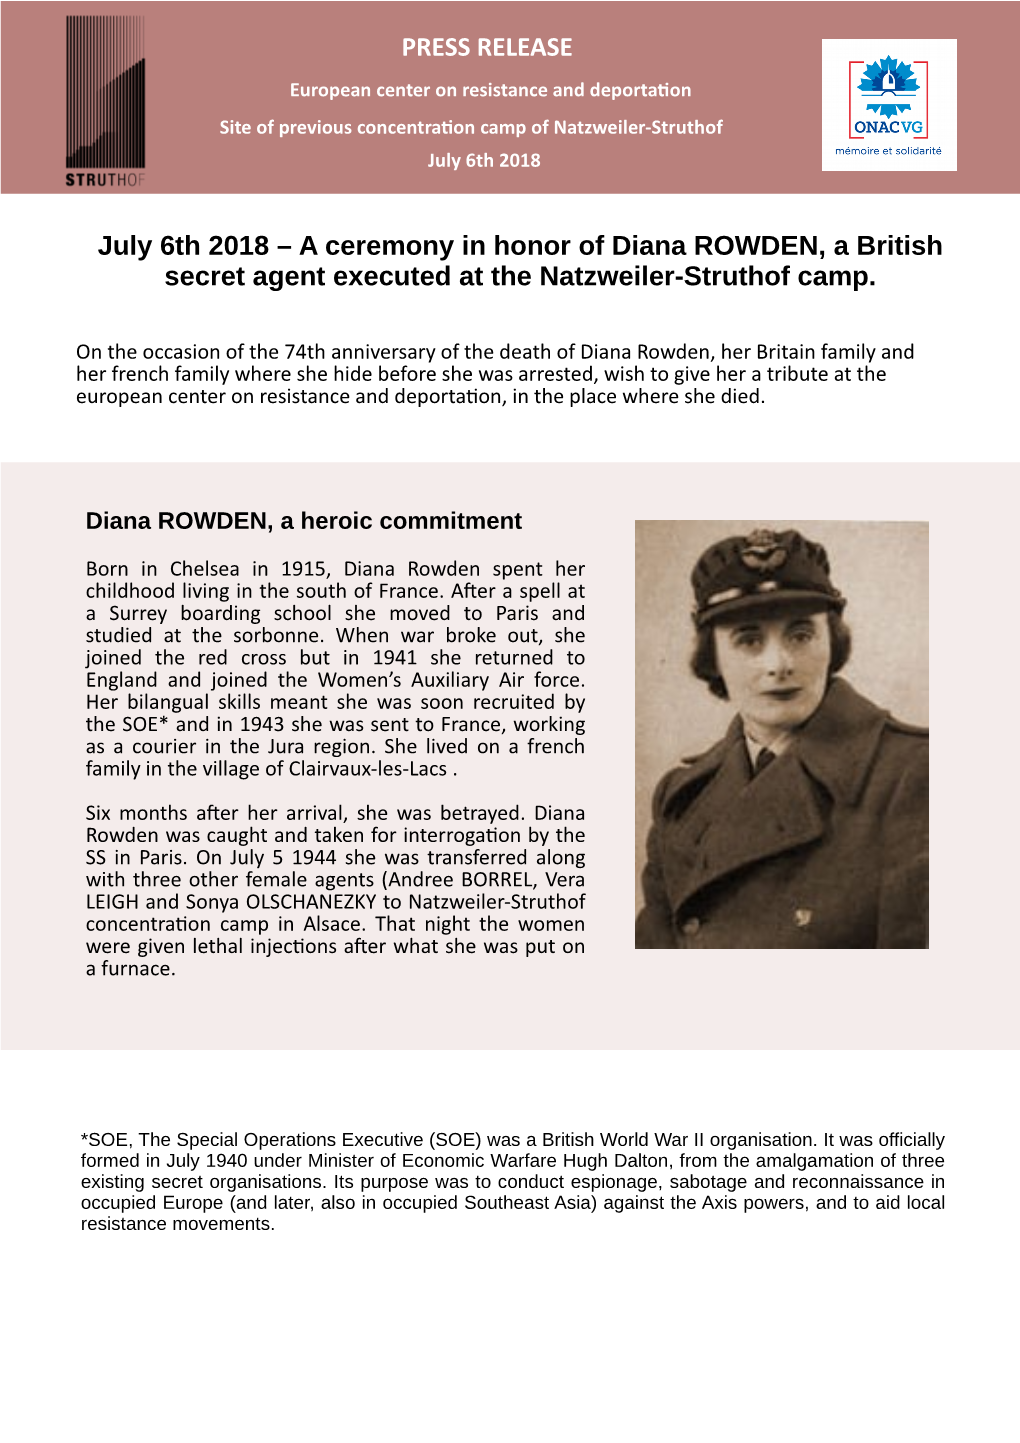 Ceremony in Honor of Diana ROWDEN, a British Secret Agent Executed at the Natzweiler-Struthof Camp